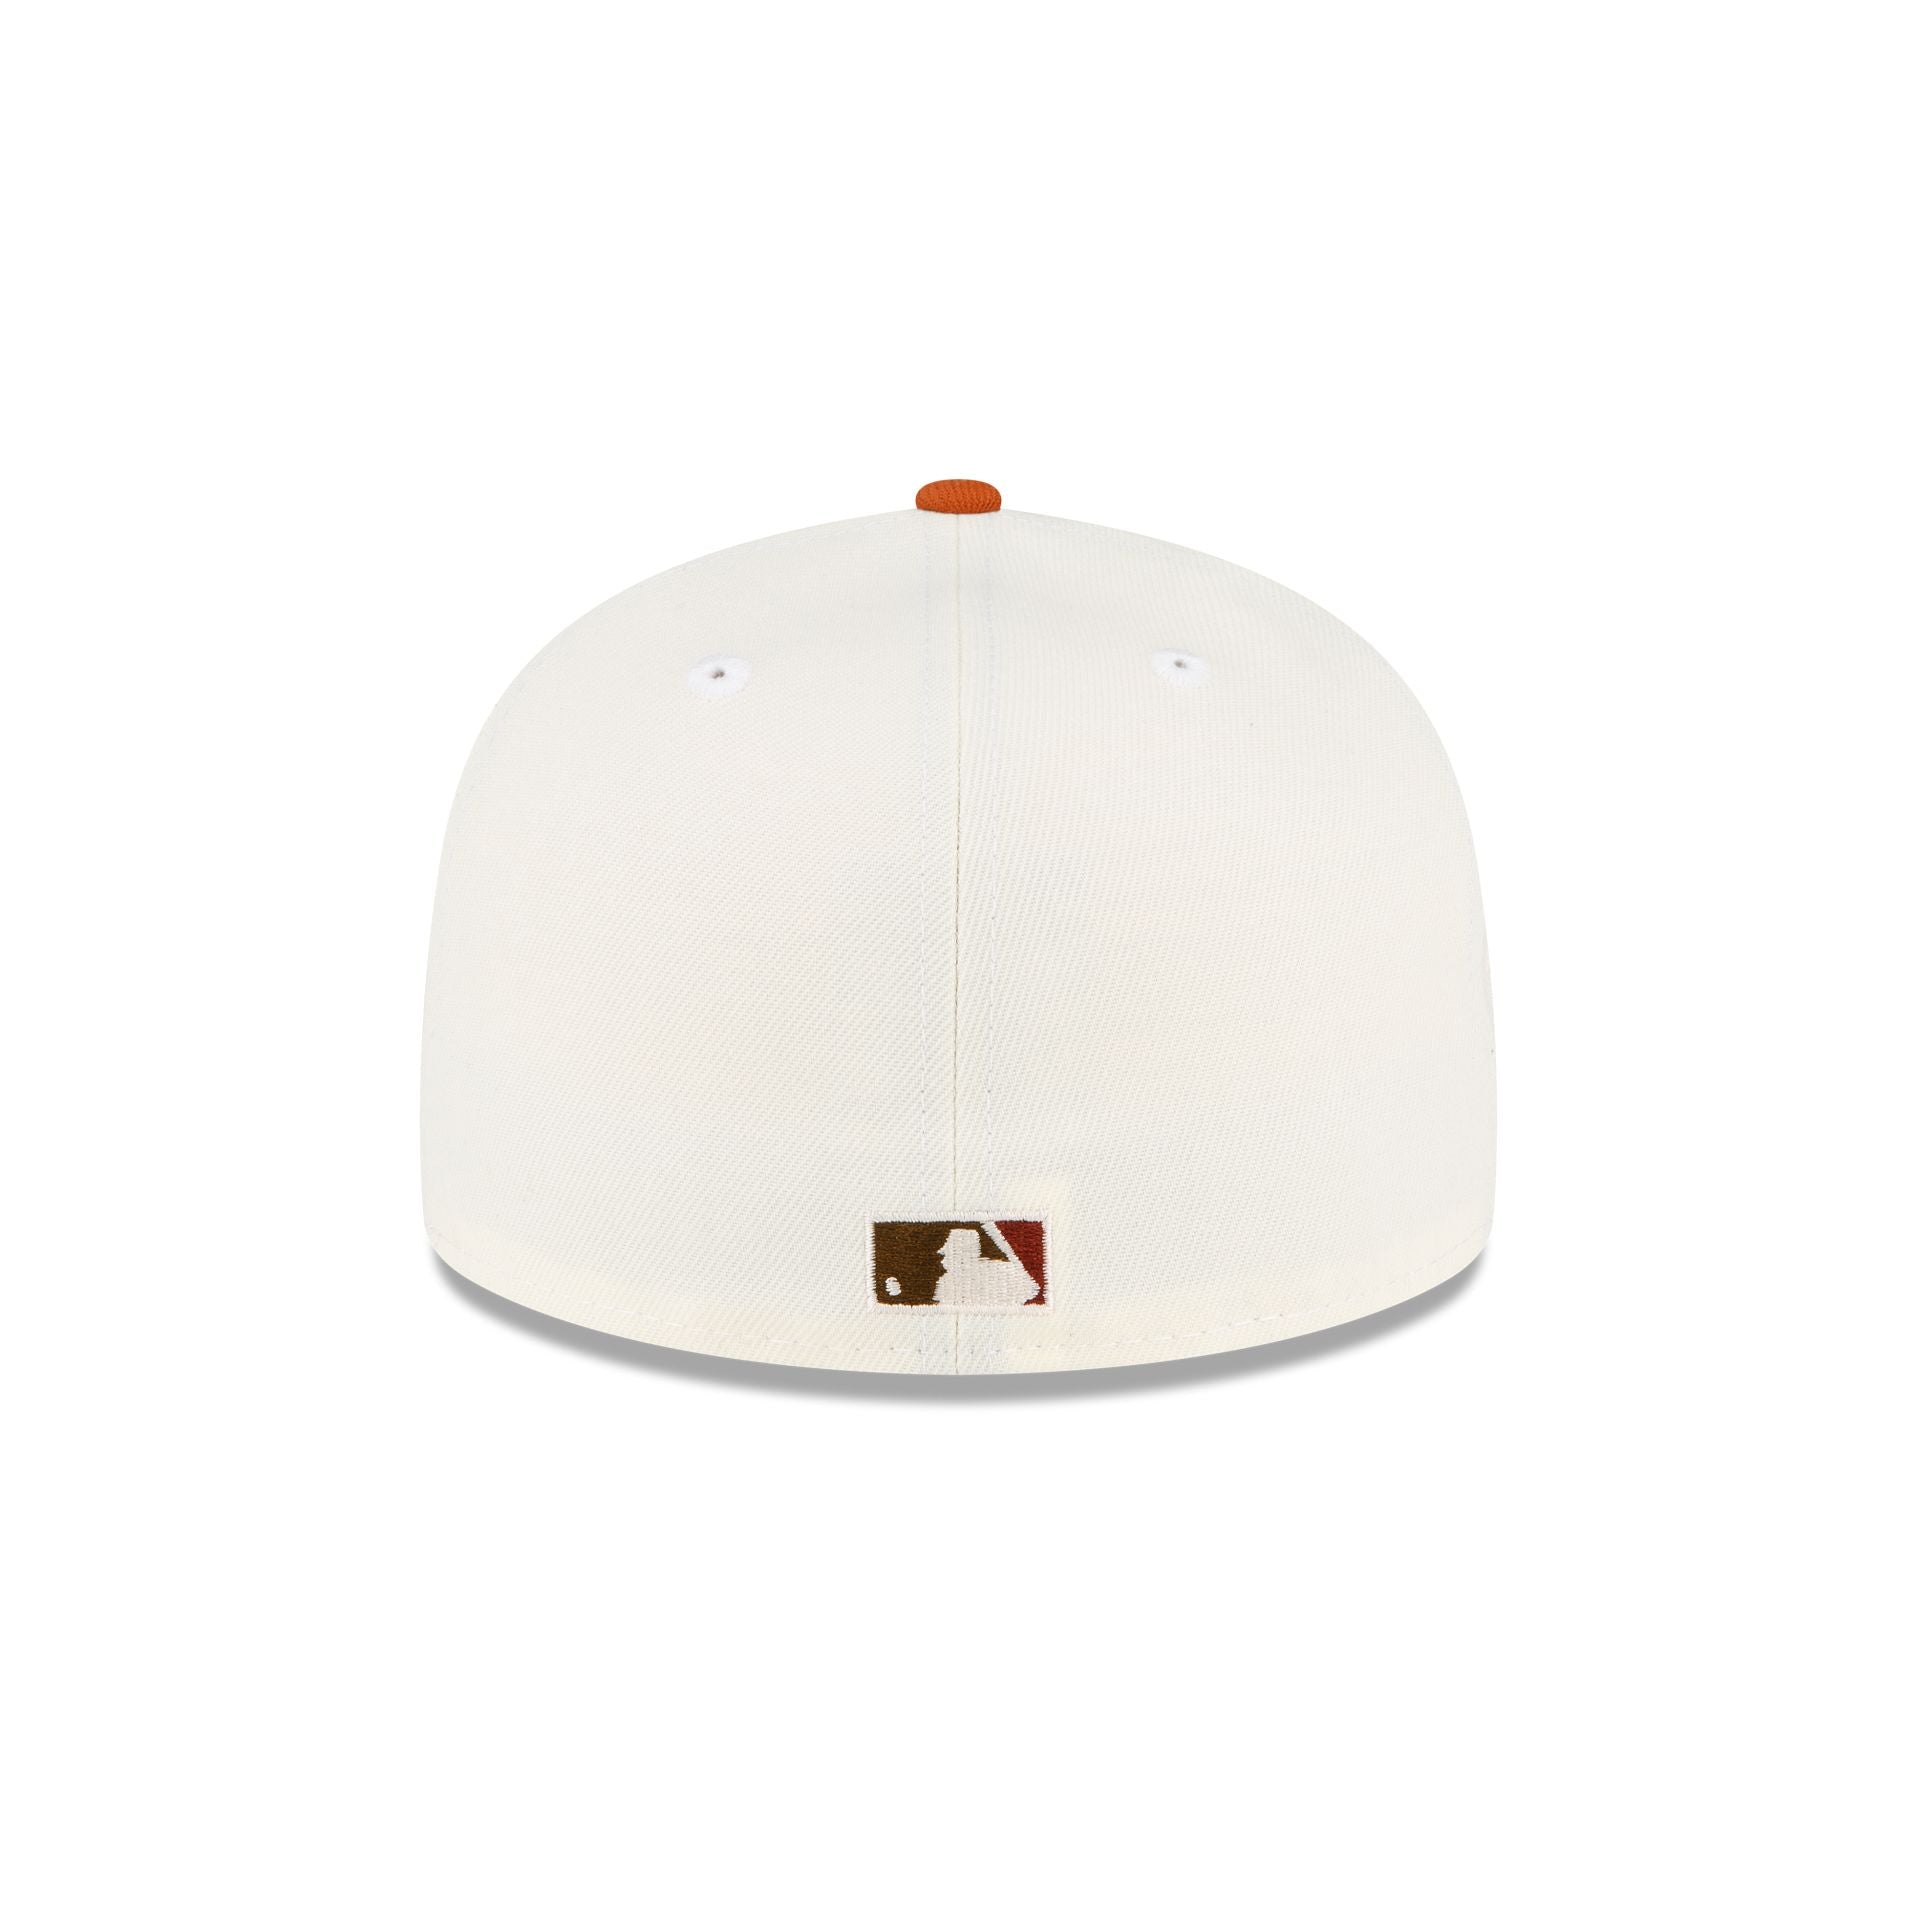 Just Caps Rust Orange Los Angeles Dodgers 59FIFTY Fitted Hat, White - Size: 7 3/4, MLB by New Era